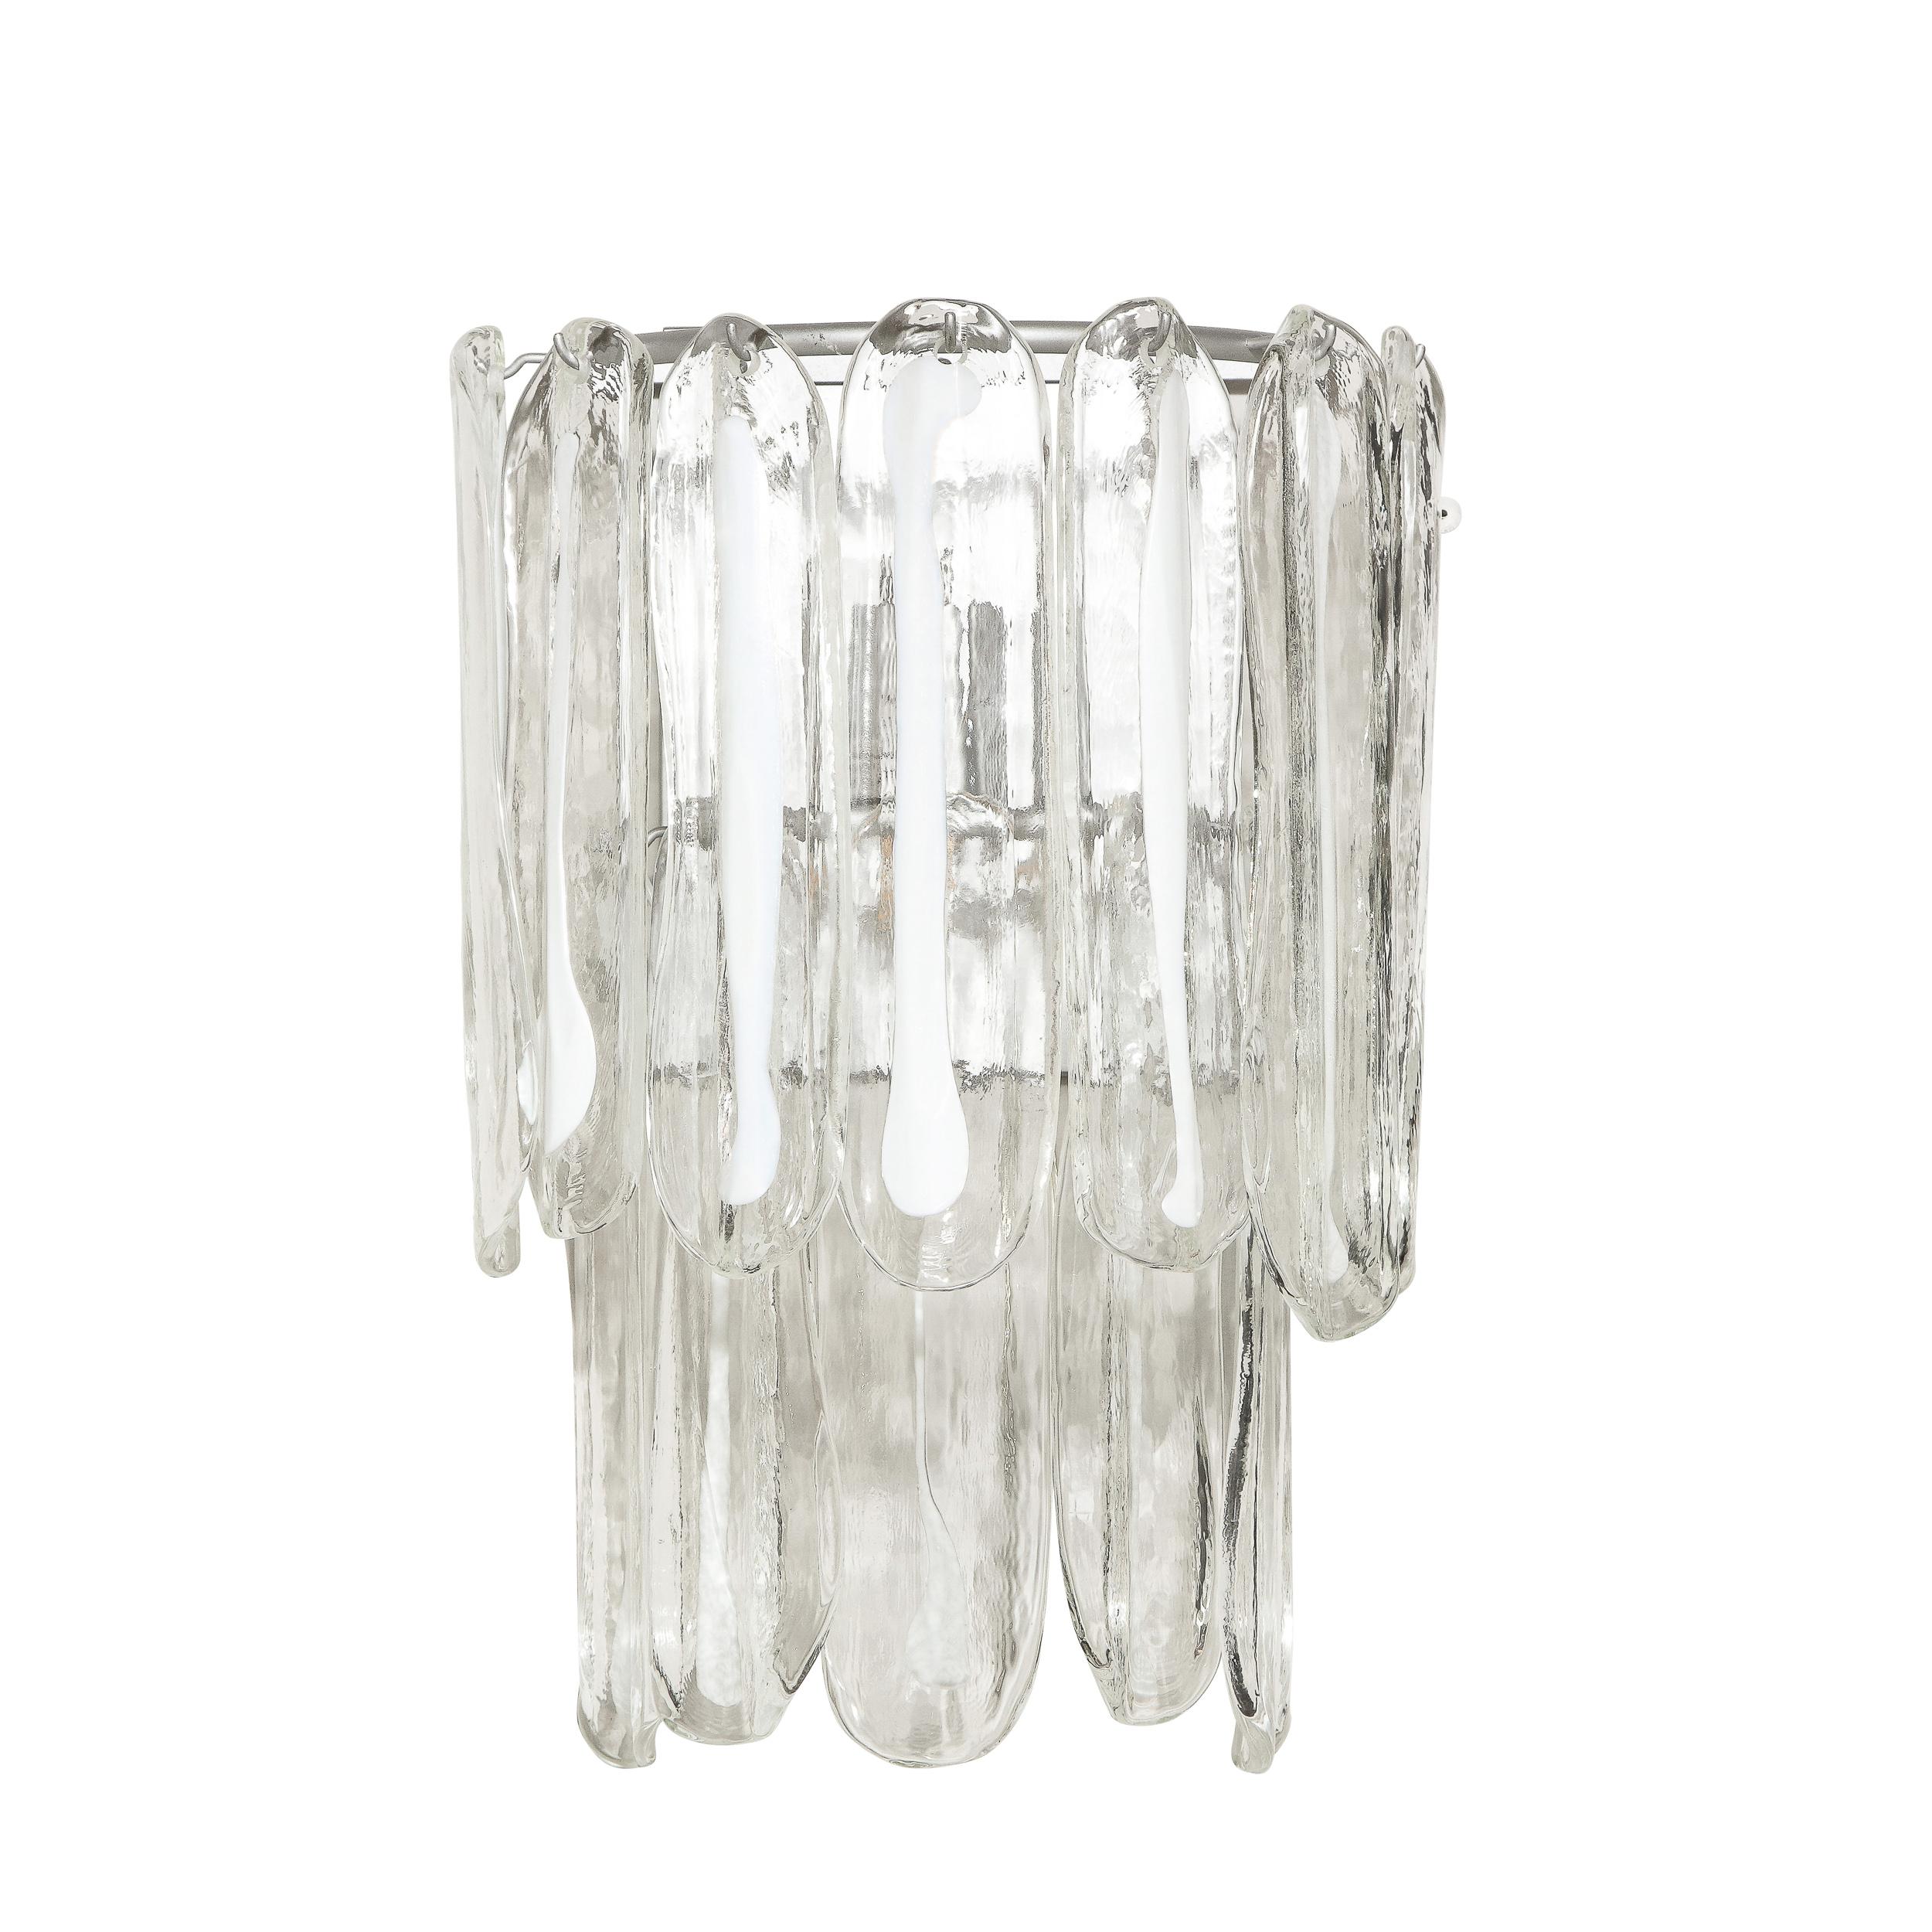 This elegant pair of Mid-Century Modern sconces were realized by the esteemed Italian maker Mazzega in Murano, Italy circa 1970. They feature ovoid shades in translucent Murano glass with white opaque centers attached to a lustrous chrome frame.